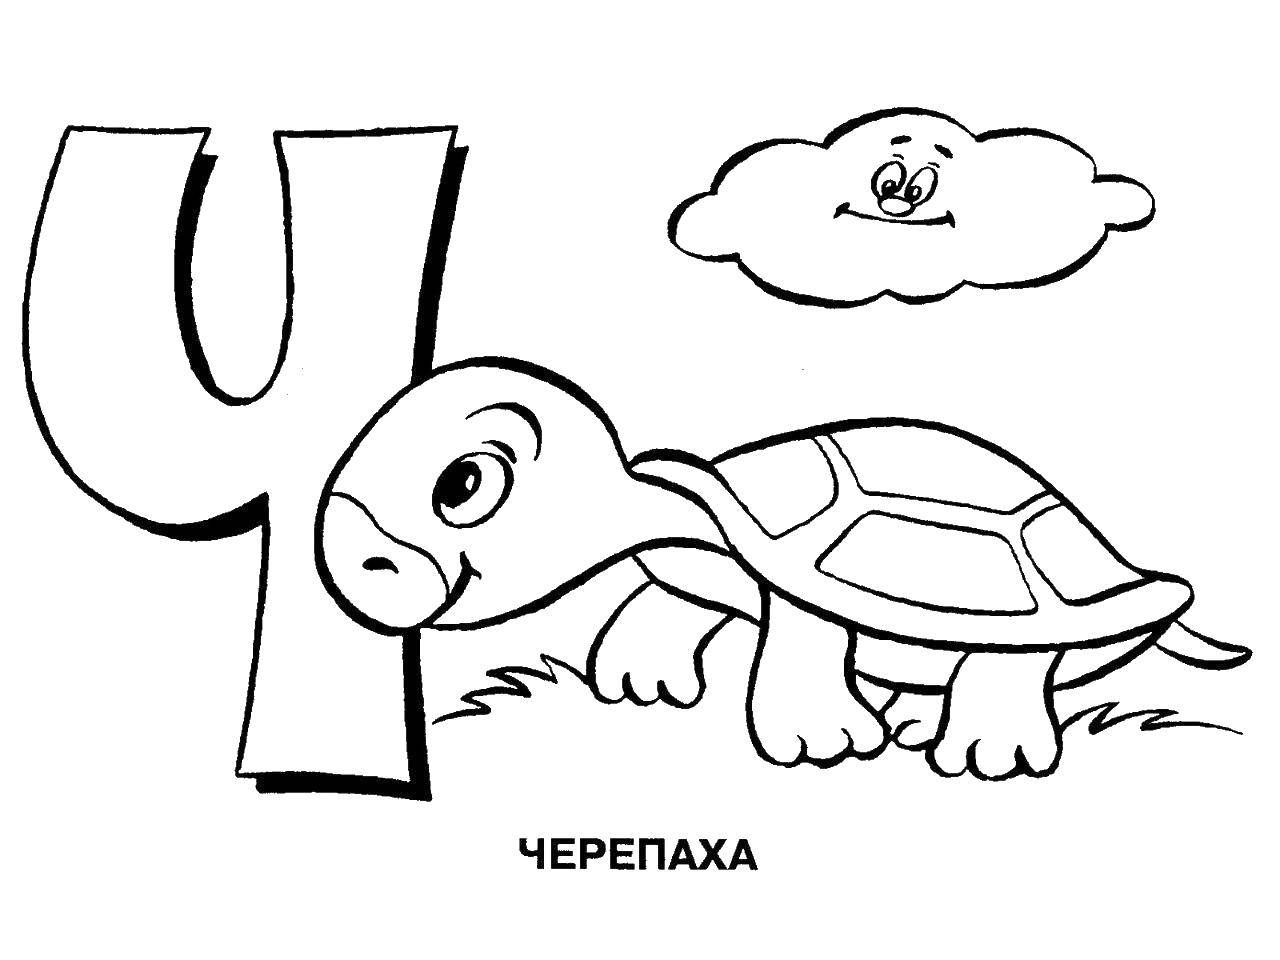 Coloring The turtle with the letter h. Category the alphabet. Tags:  the alphabet, turtle.